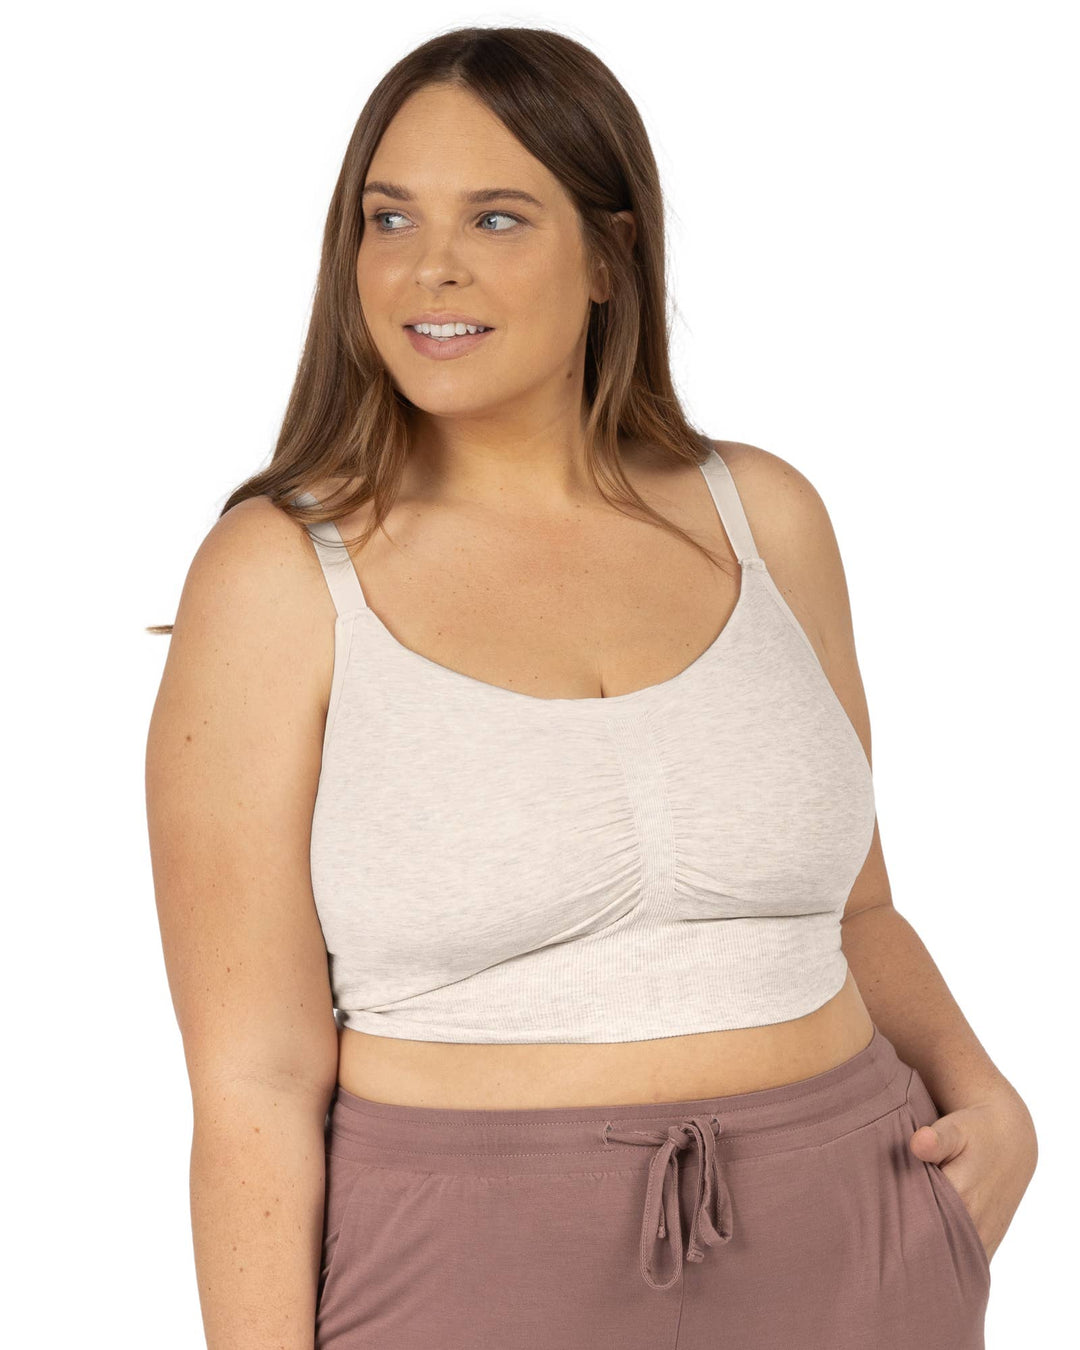 Kindred Bravely - Sublime Bamboo Hands-Free Pumping Lounge & Sleep Bra